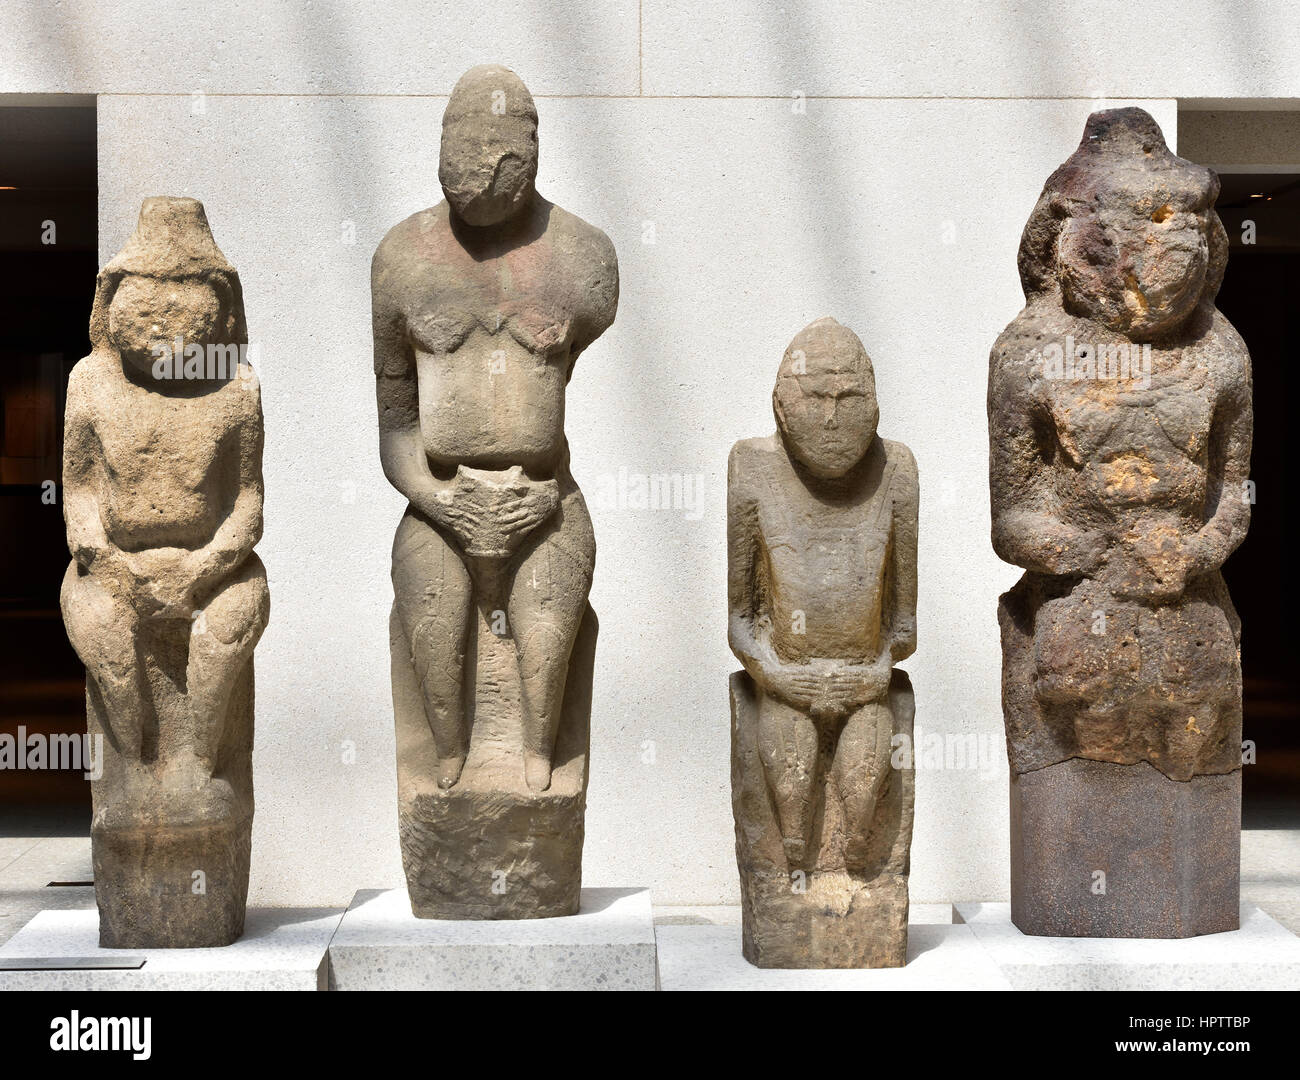 Cuman stone figures of men and women. 12th century AD. The Cumans were a Turkic tribe that ruled the southern Russian steppes from 1055-1240 AD. Stock Photo